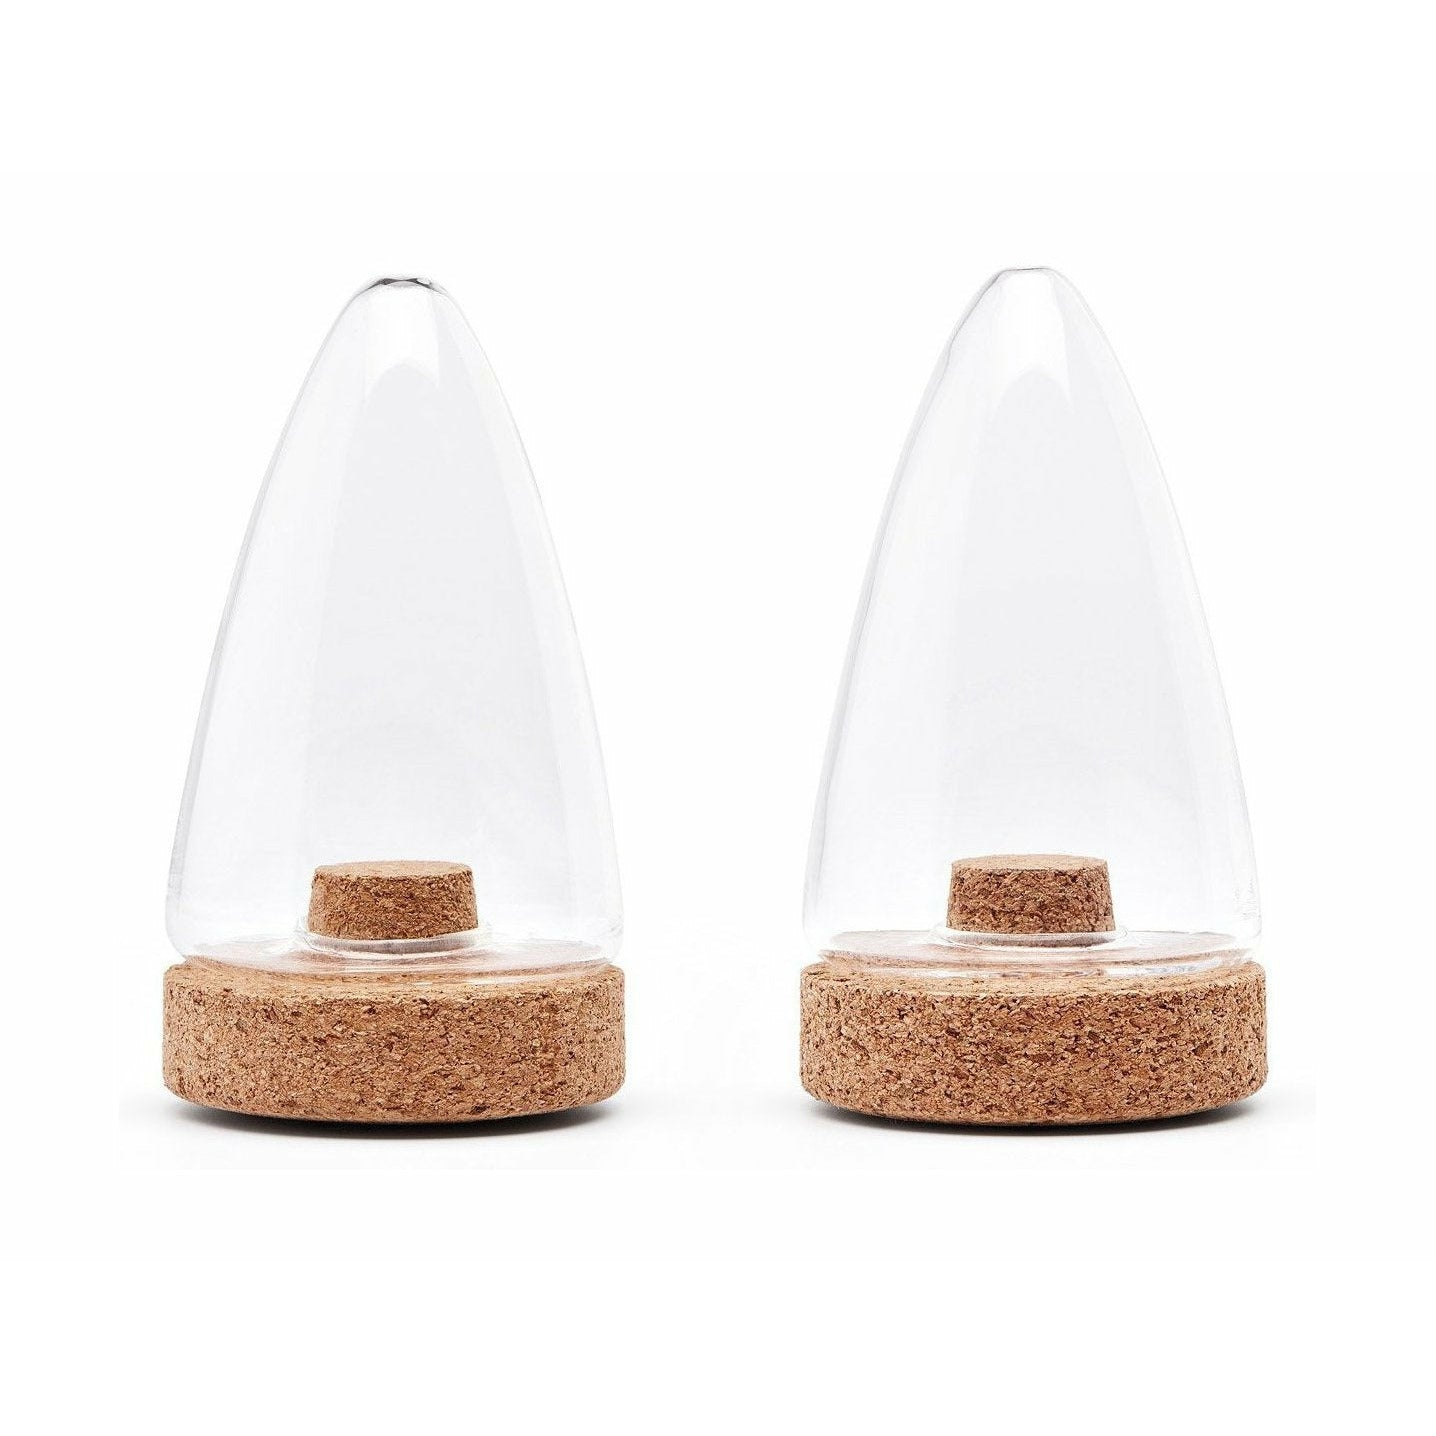 Two Puik Boeien glass salt and pepper shakers on a cork base.